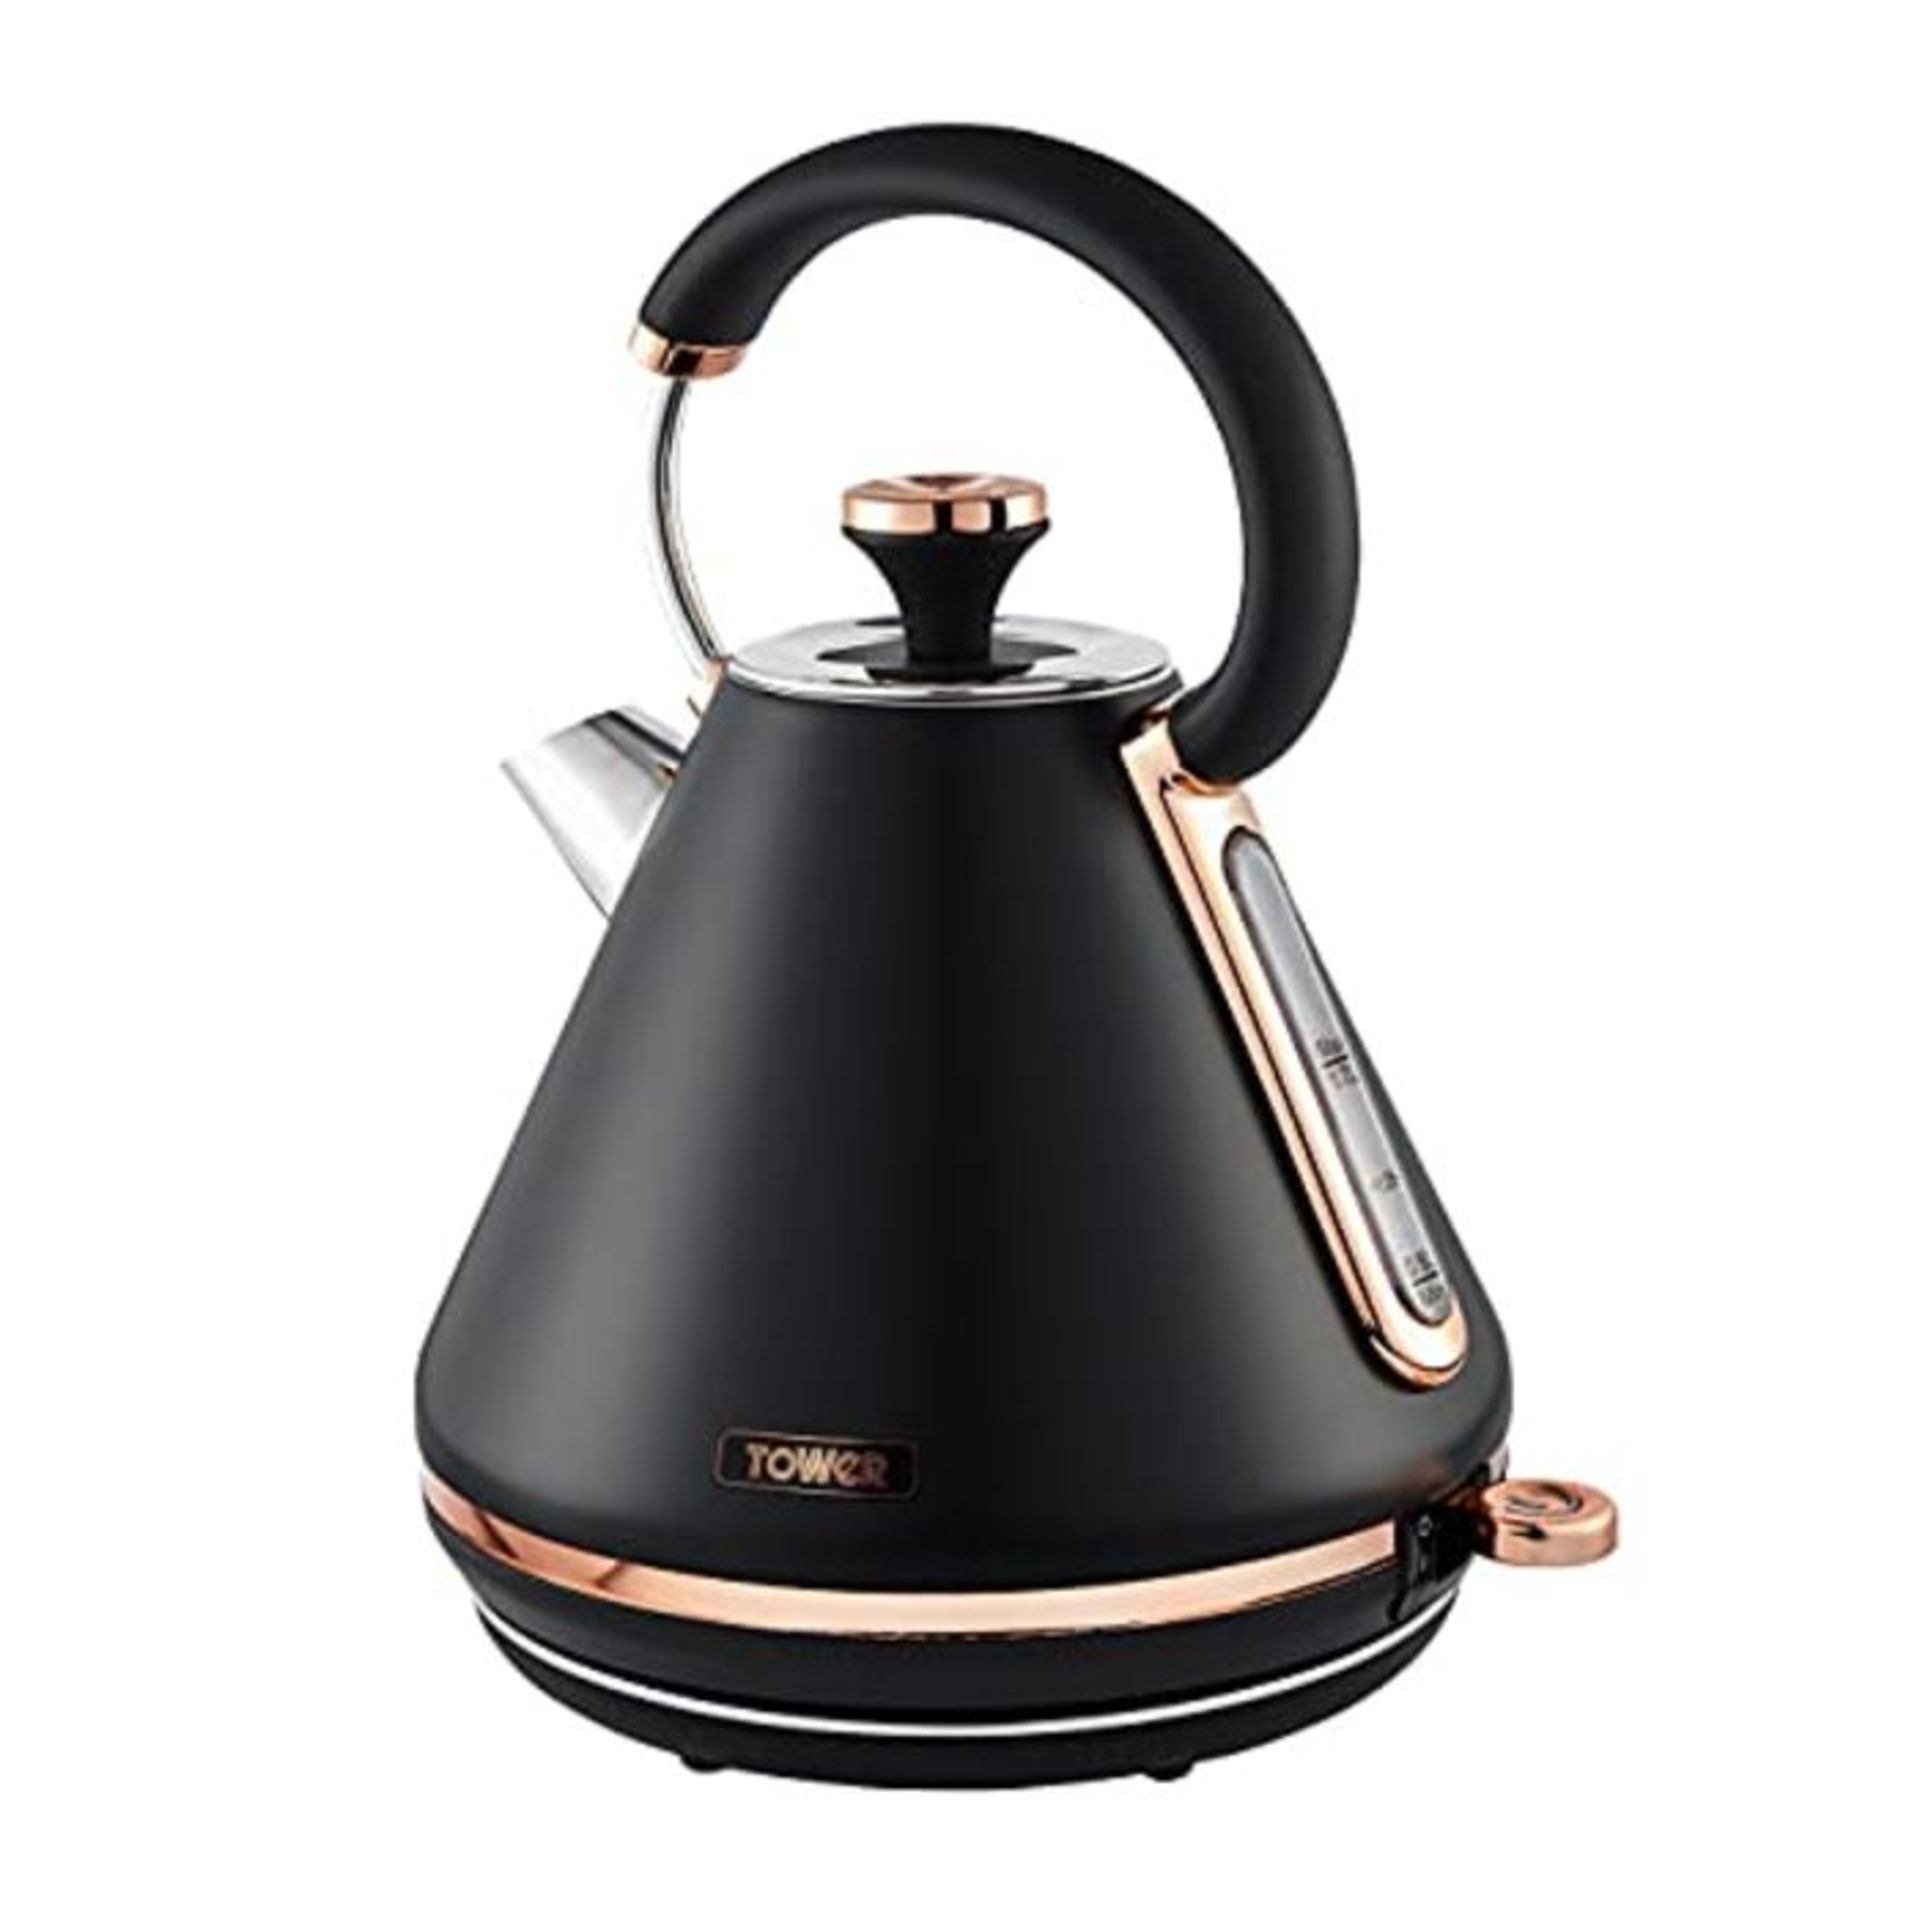 Tower T10044RG Cavaletto Pyramid Kettle with Fast Boil, Detachable Filter, 1.7 Litre,